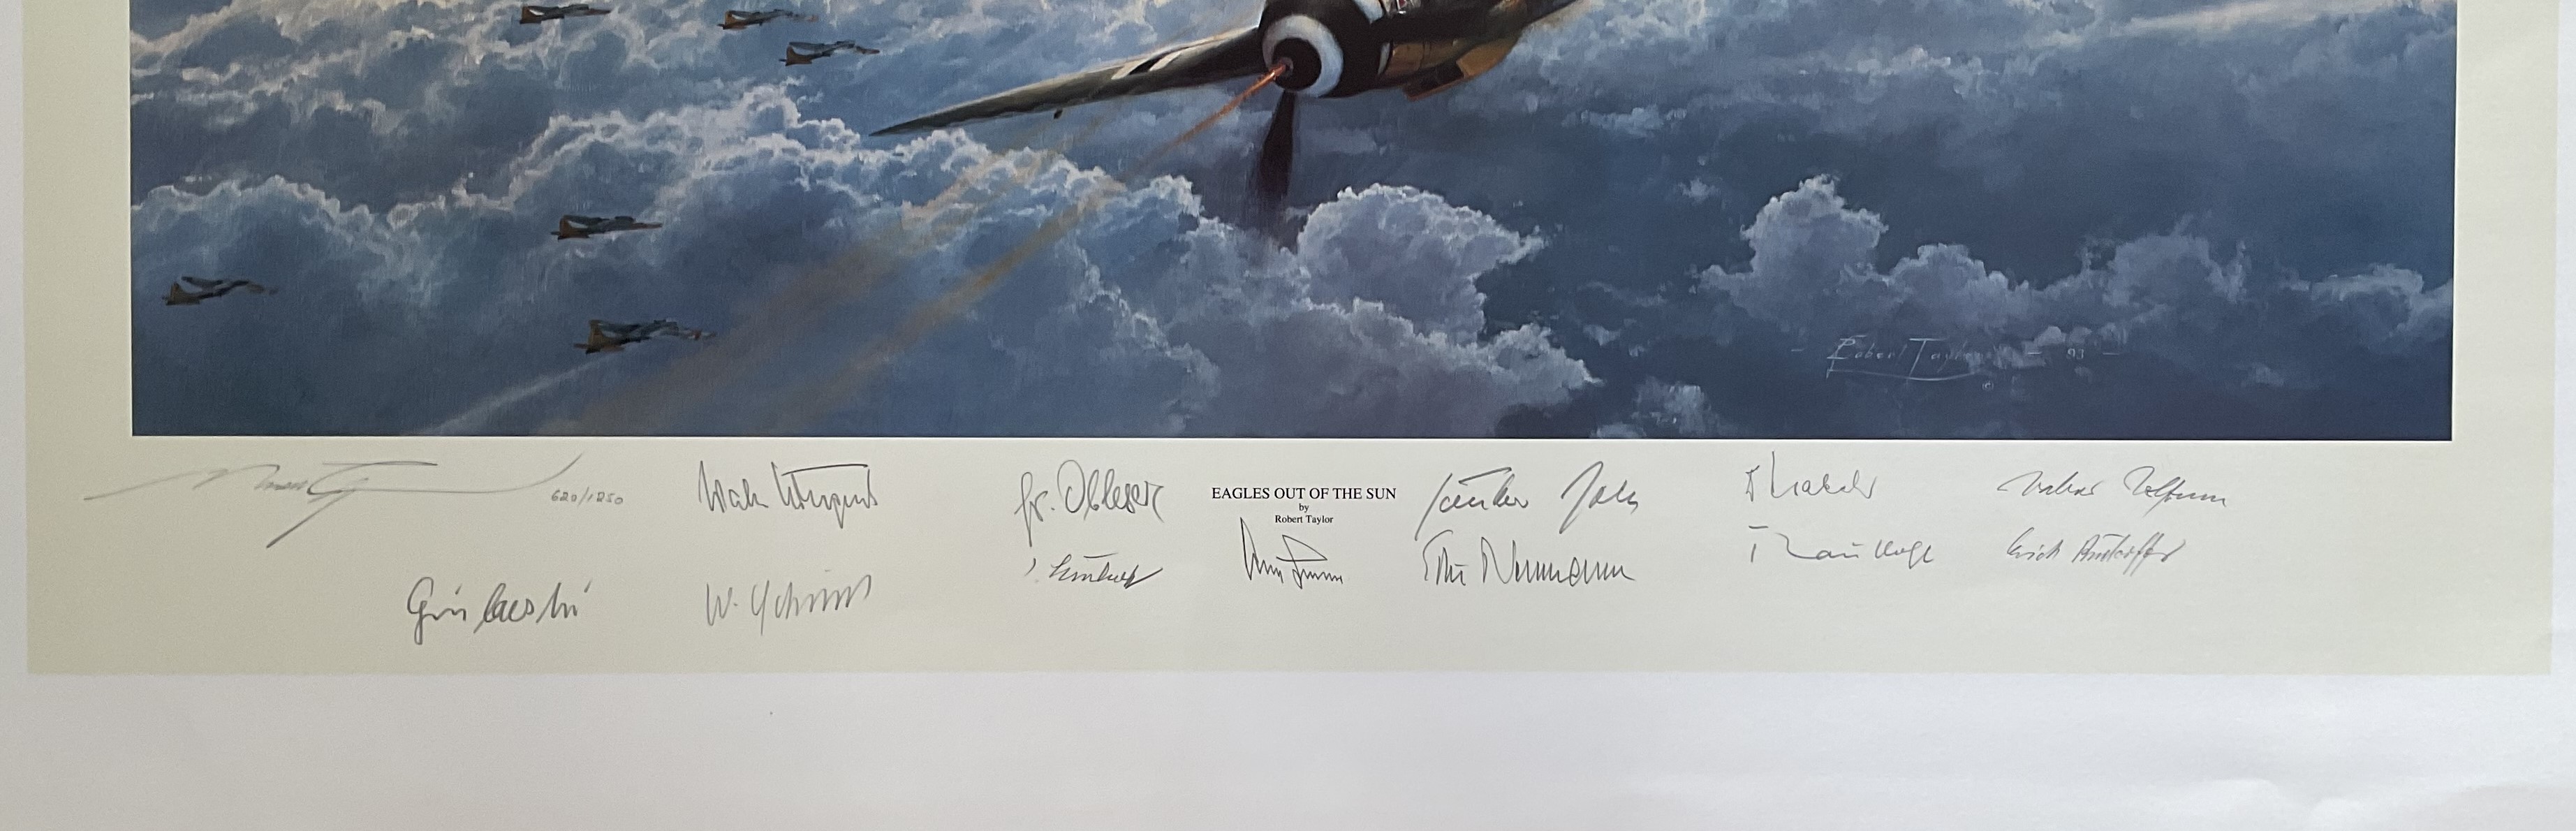 Eagles out of The Sun By Robert Taylor, Limited Edition Print, Signed by 12 Luftwaffe Fighter Aces - Image 2 of 2